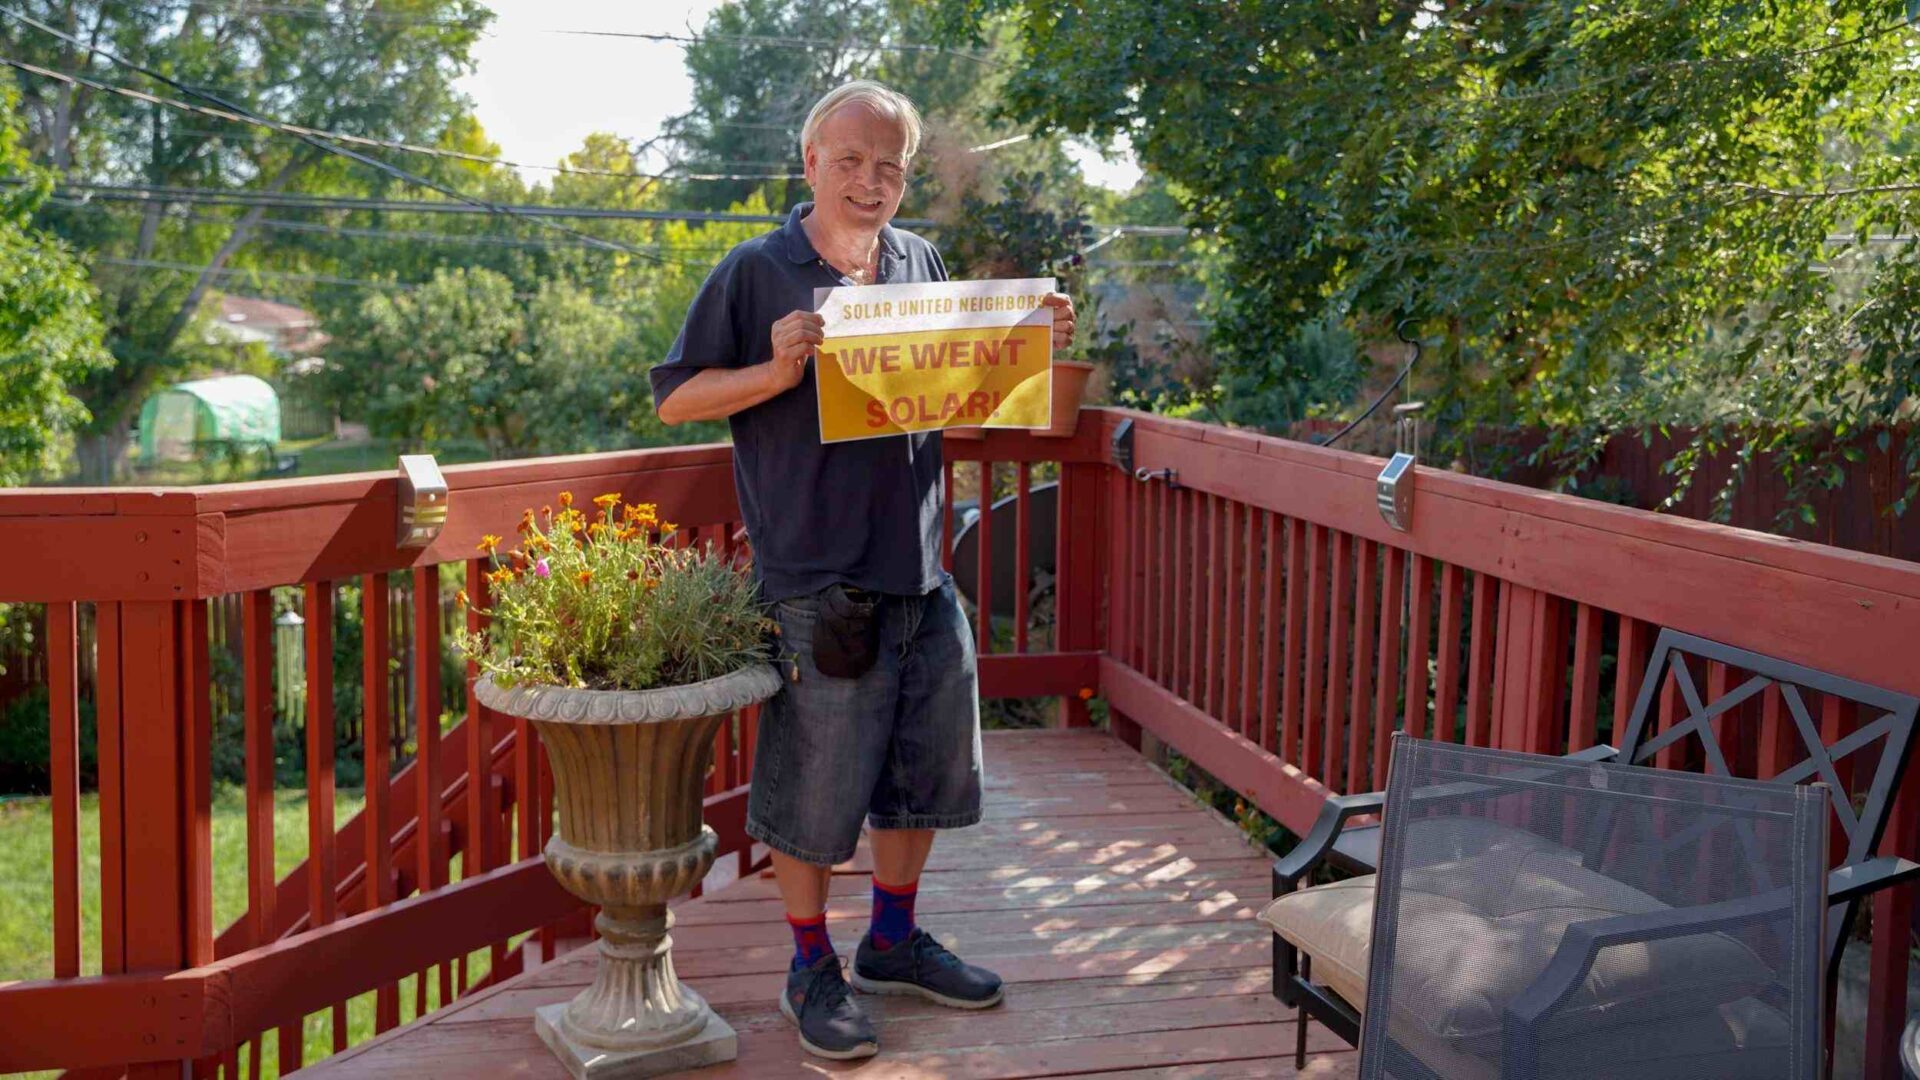 Man standing on backyard deck holding sign that reads "We went solar!"